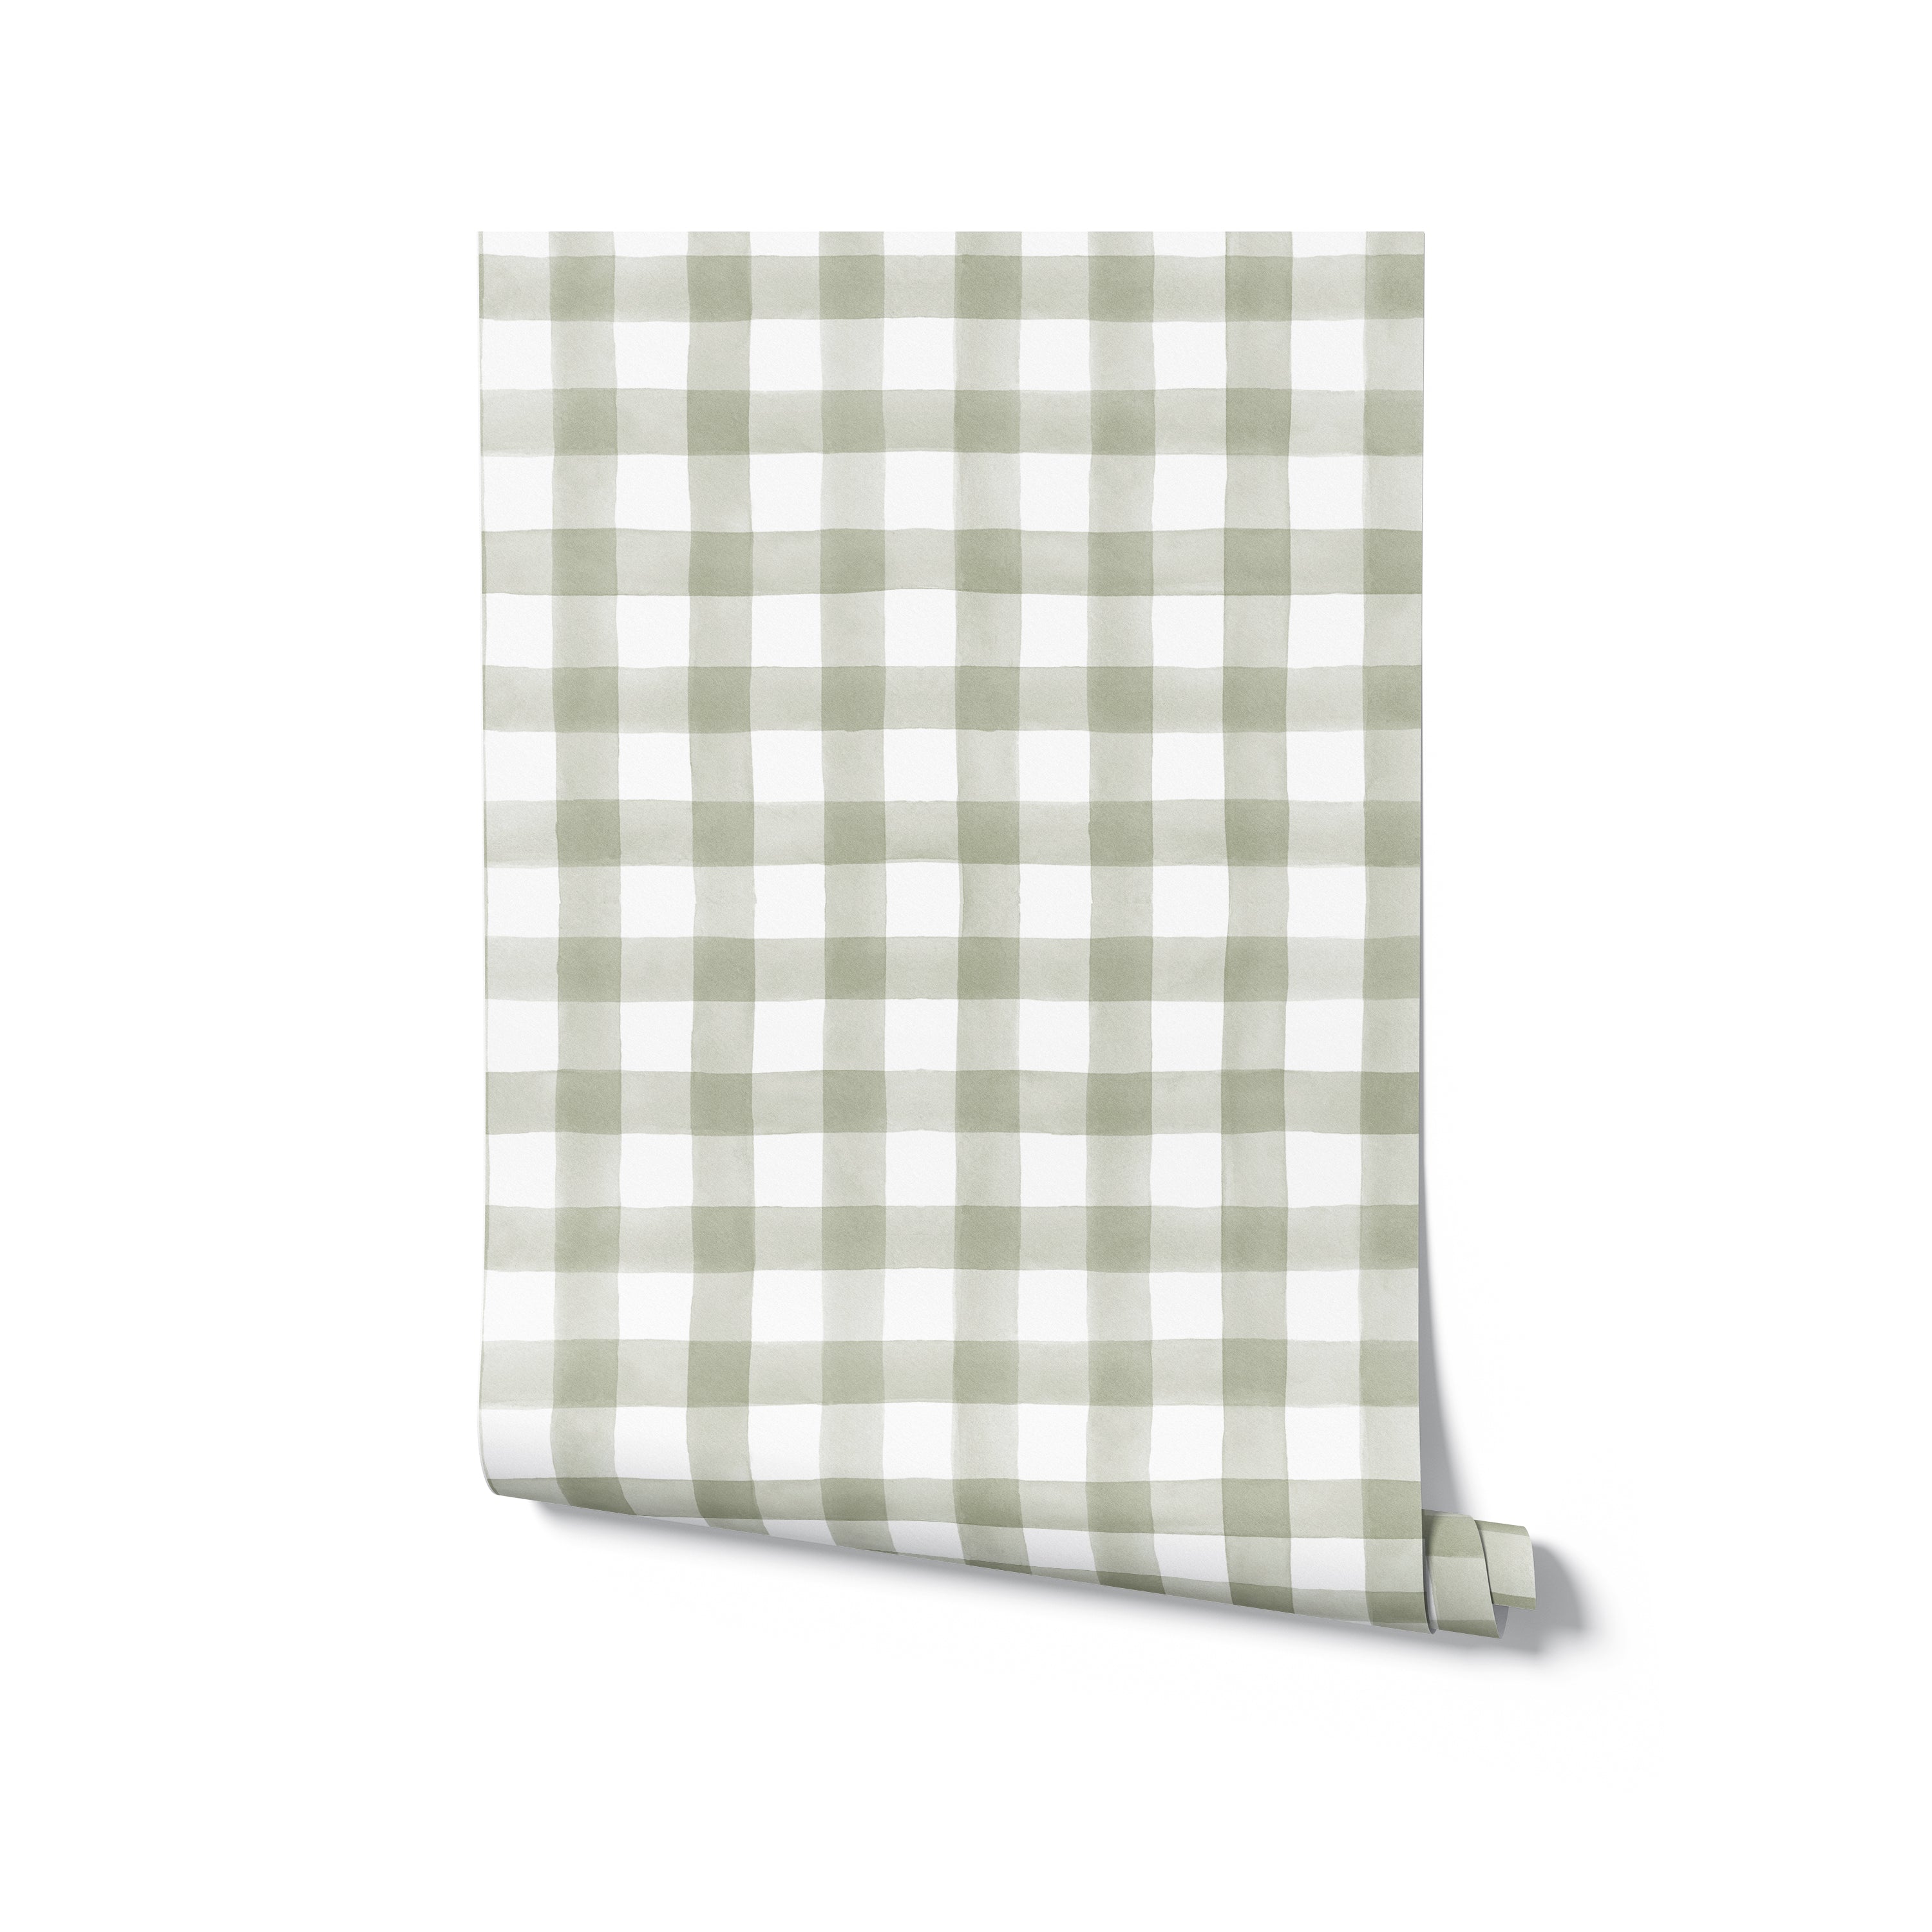 A close-up view of a rolled-up piece of sage green and white buffalo check wallpaper. The soft green hues paired with the clean white checks offer a serene and refreshing look, ideal for spaces seeking a touch of color and tranquility.